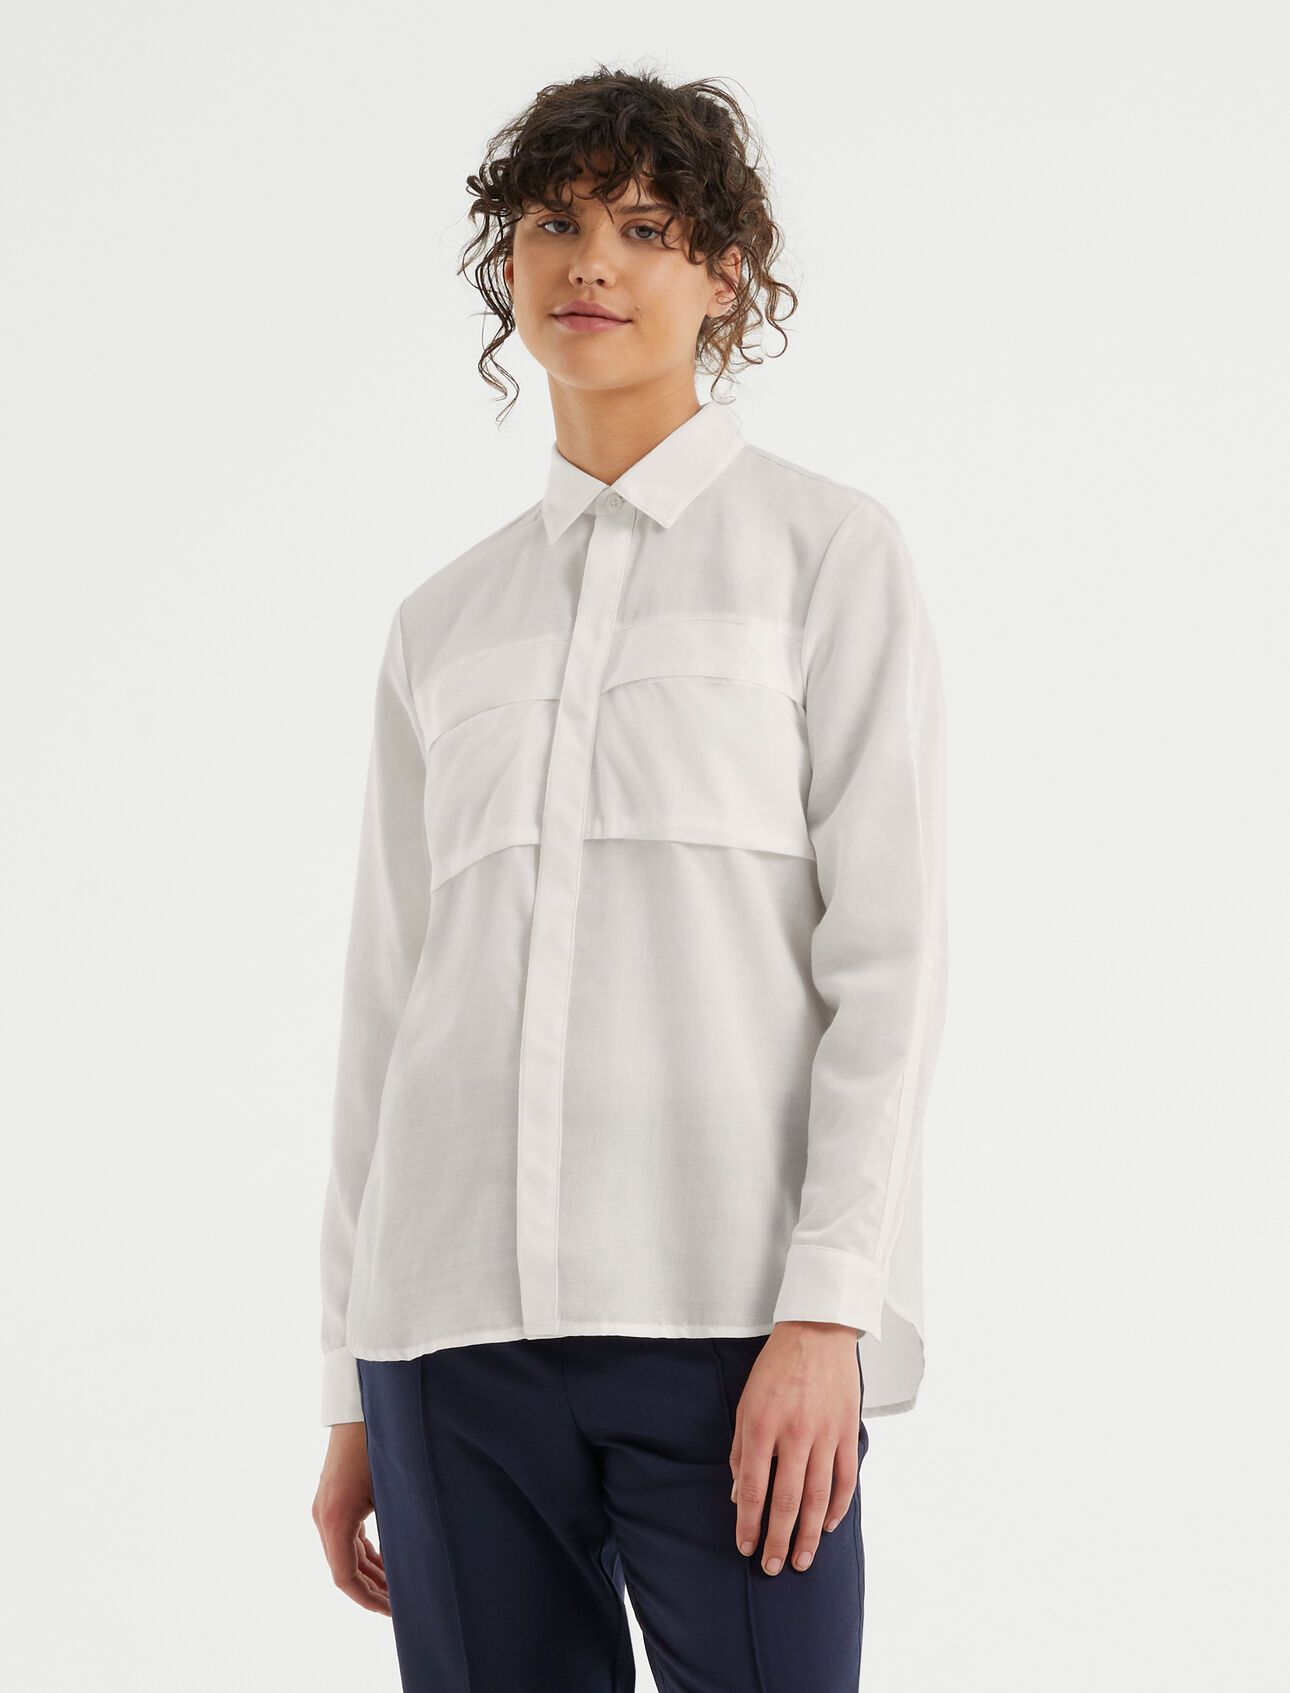 Womens Merino Natural Blend Overshirt An ultra-lightweight shirt made from our Cool-Lite™ woven fabric, the Merino Natural Blend Overshirt blends merino wool and TENCEL™ for cool, comfortable style.